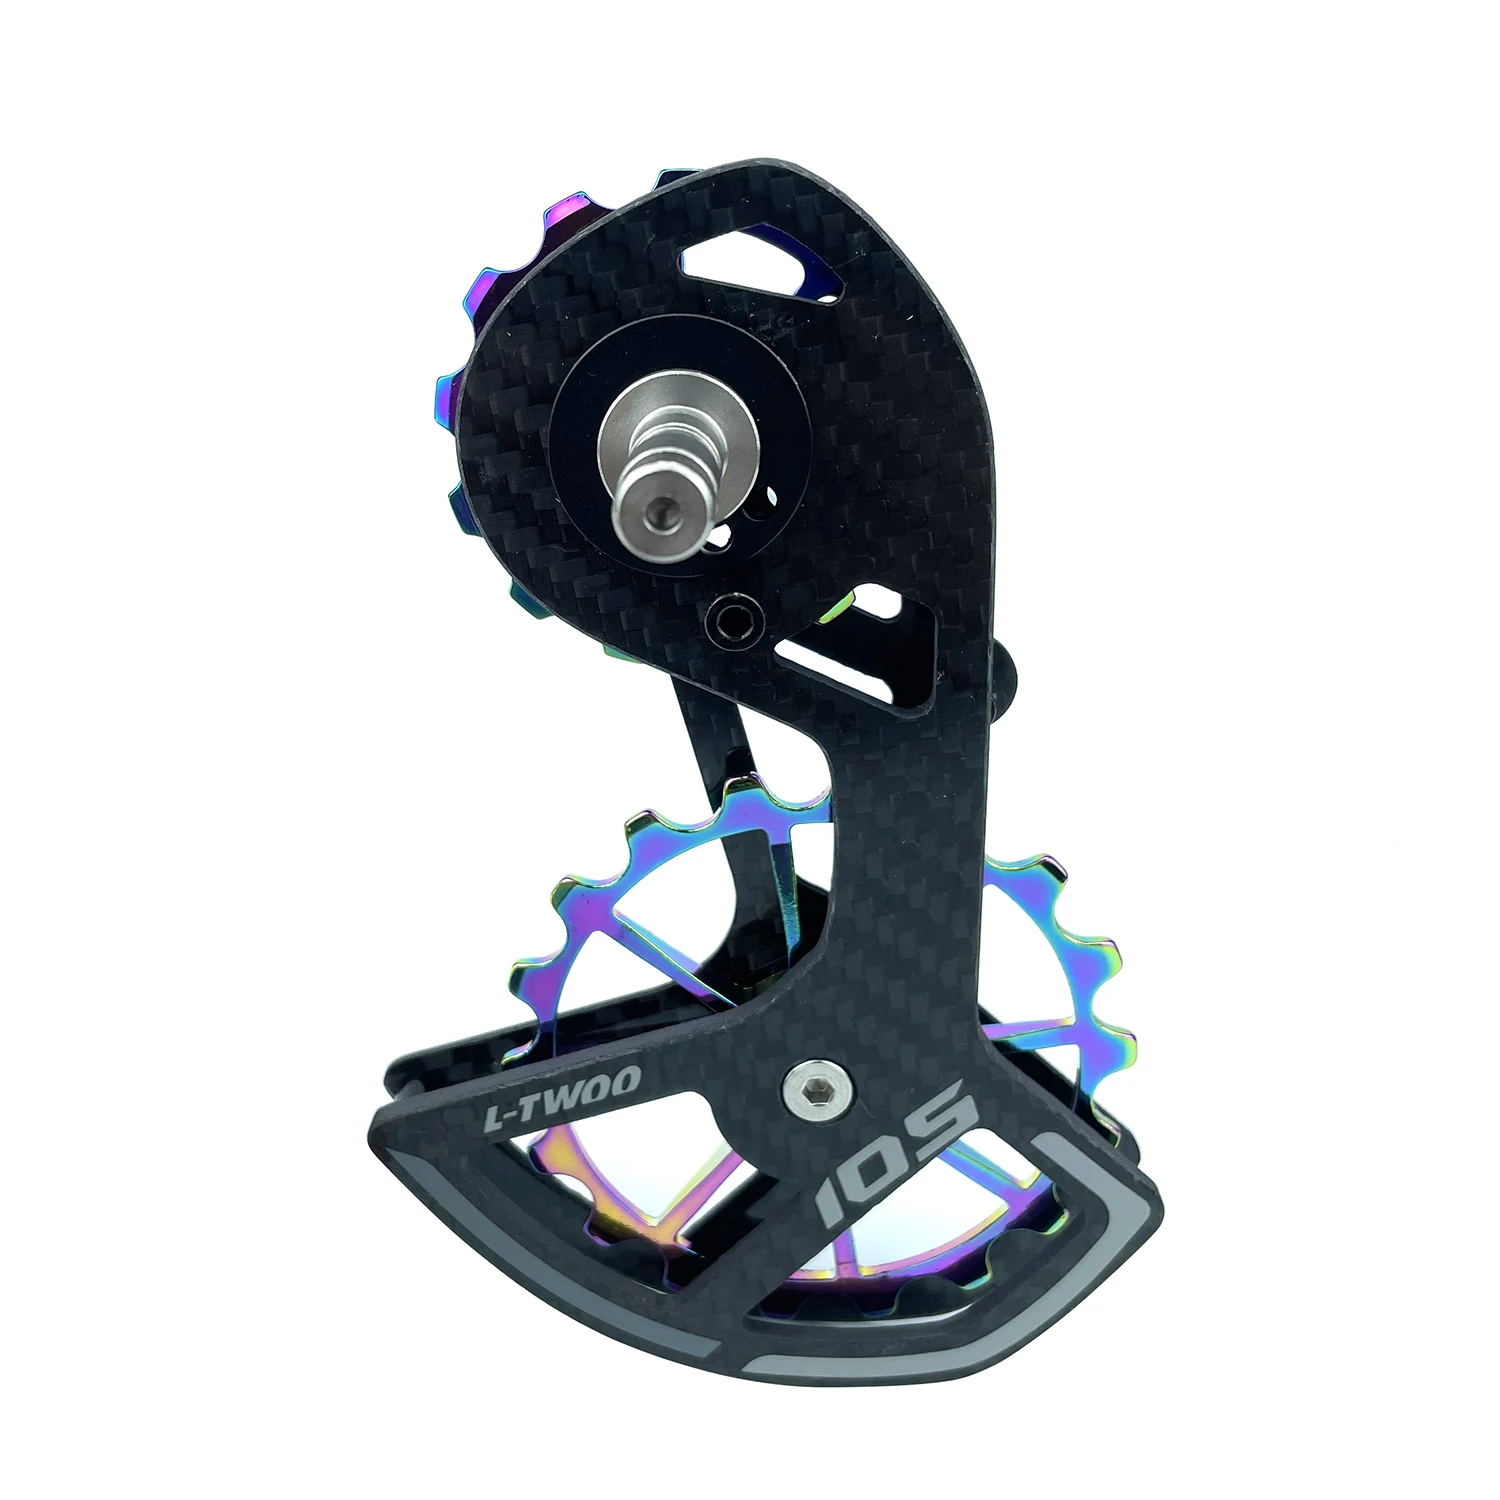 

LTWOO LW-105 New Derailleur Carbon Cage Ceramic Beraing Jockey Wheel Oversized Pulley for R7000